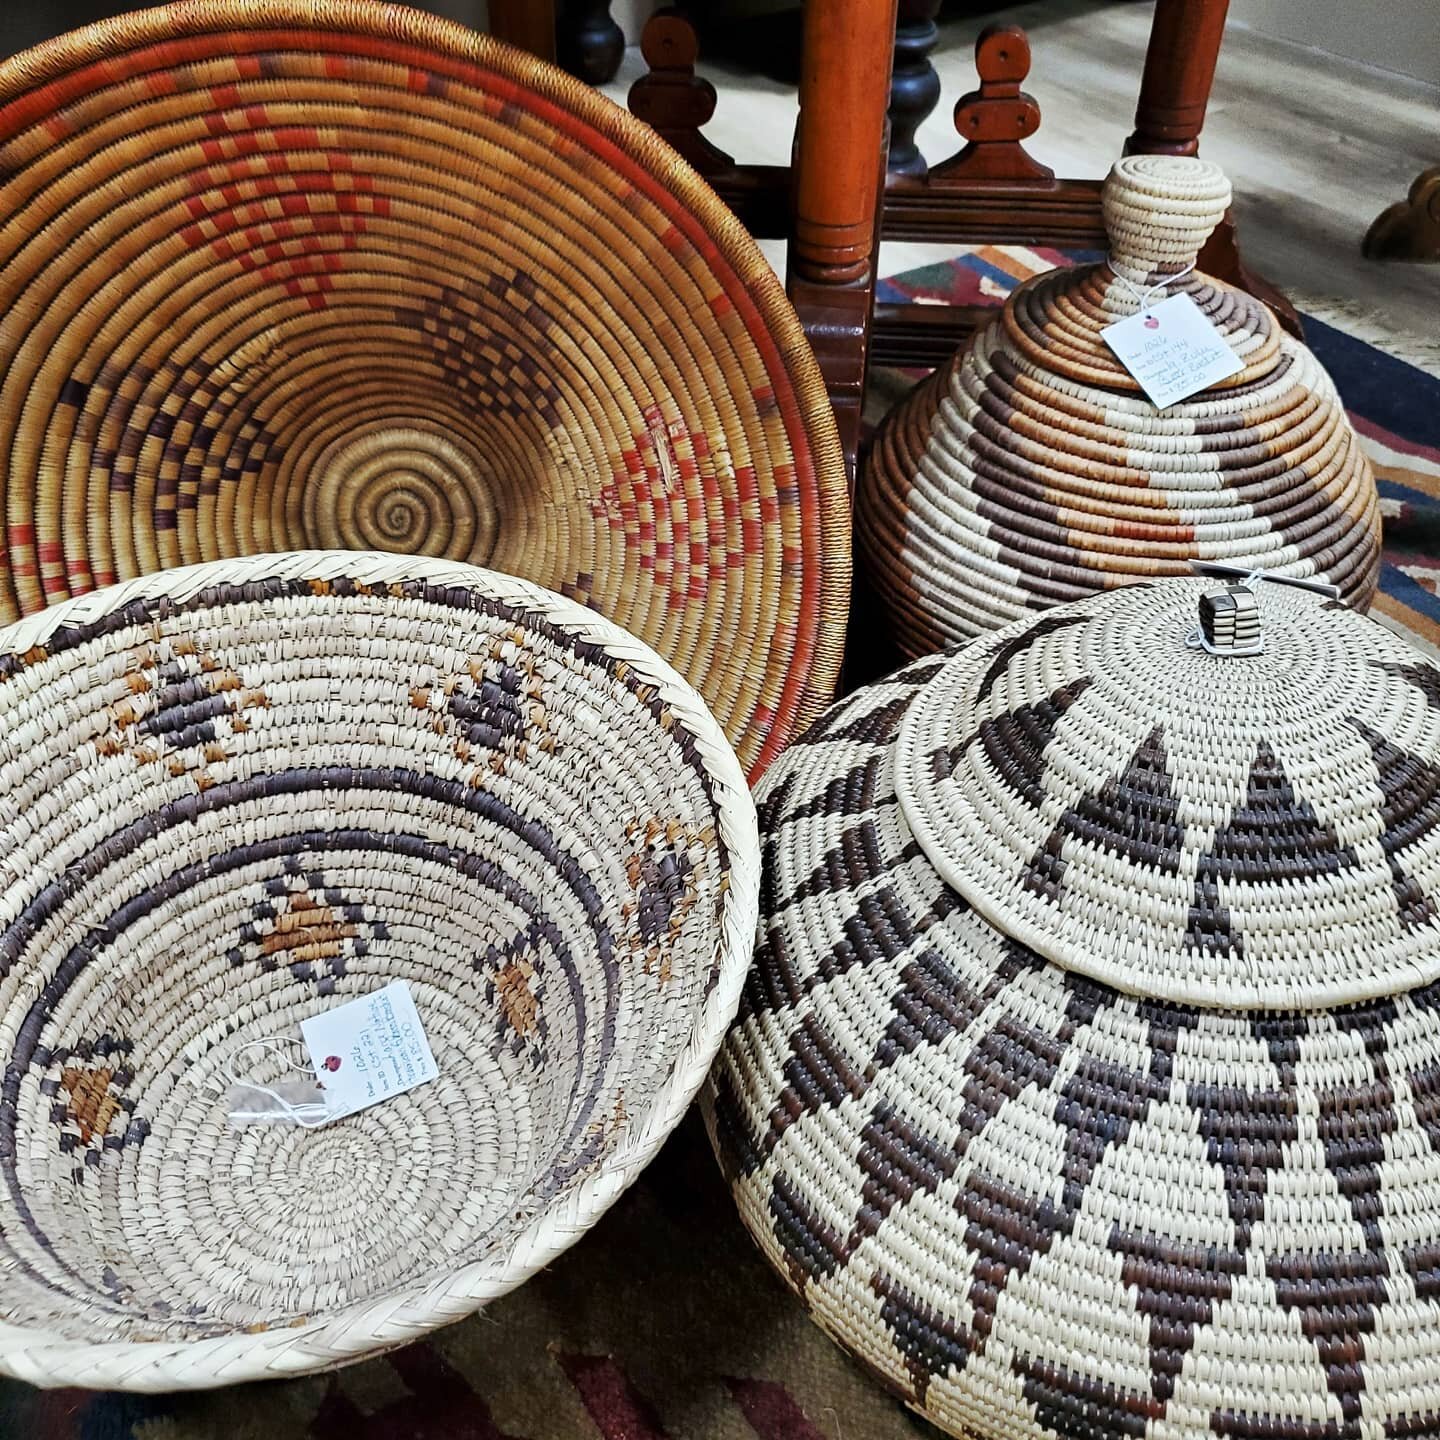 Native-made baskets have had a resurgence in popularity over the past few years. You can find reproductions, but they pale in comparison to these made by indigenous people. The quality is clear when it comes to a skill that's been handed down through